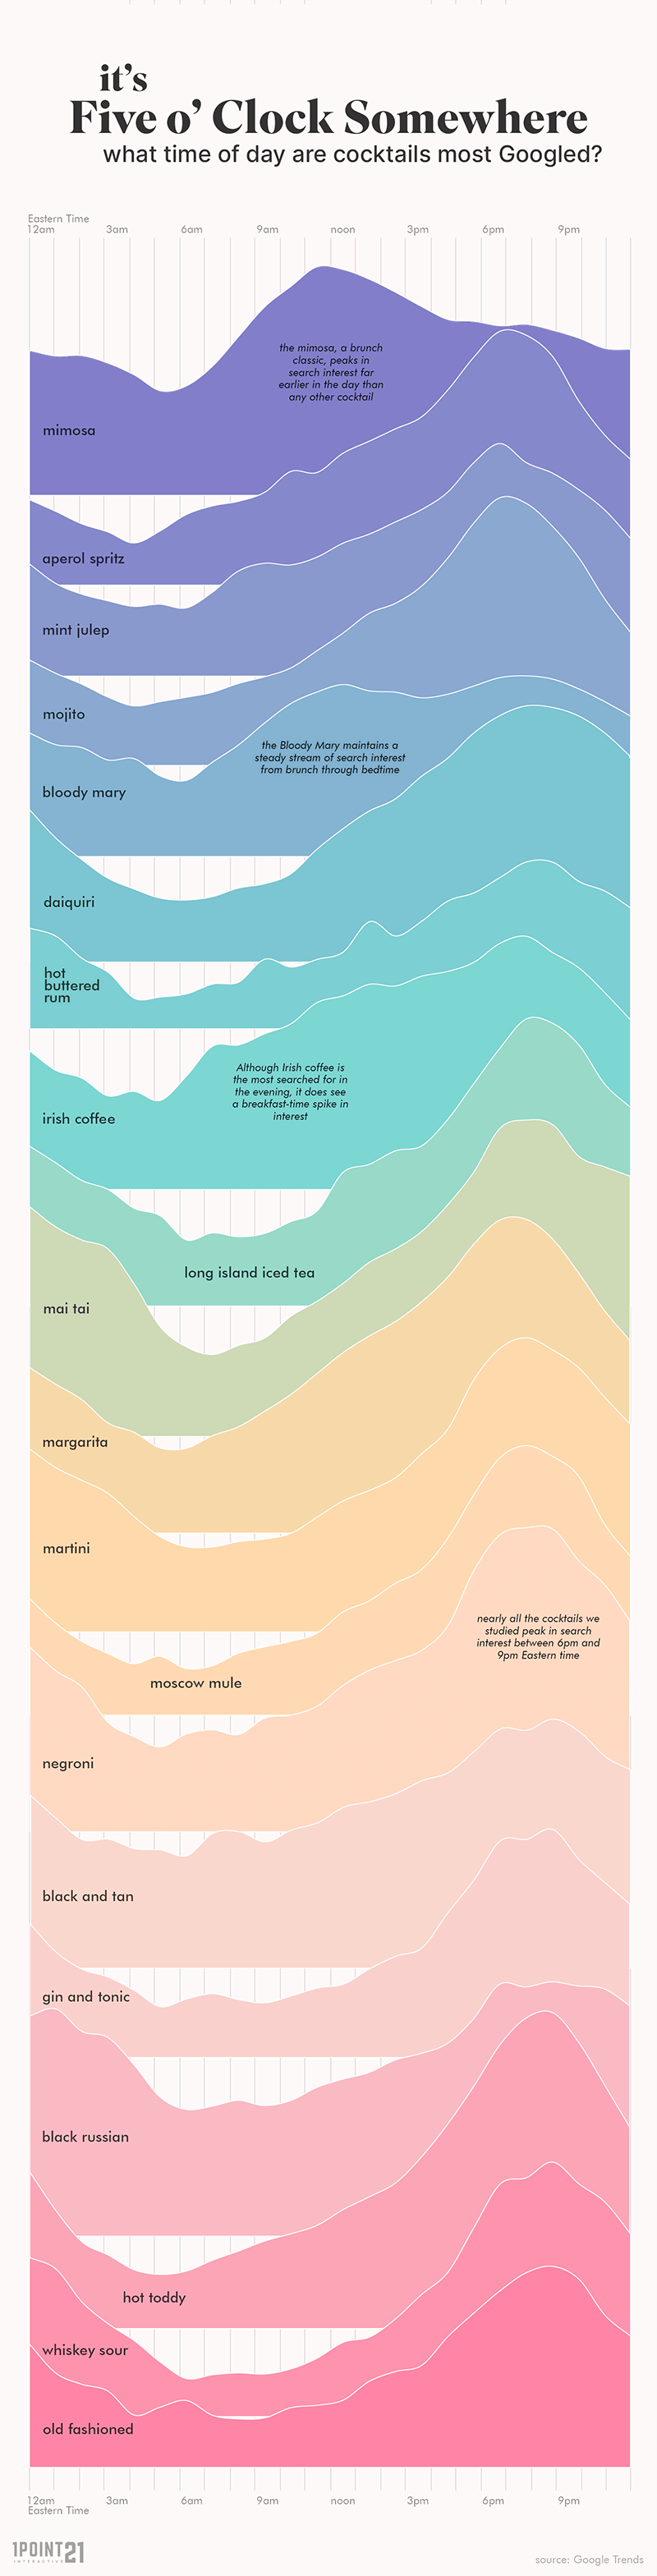 Cocktail Popularity by time of Day